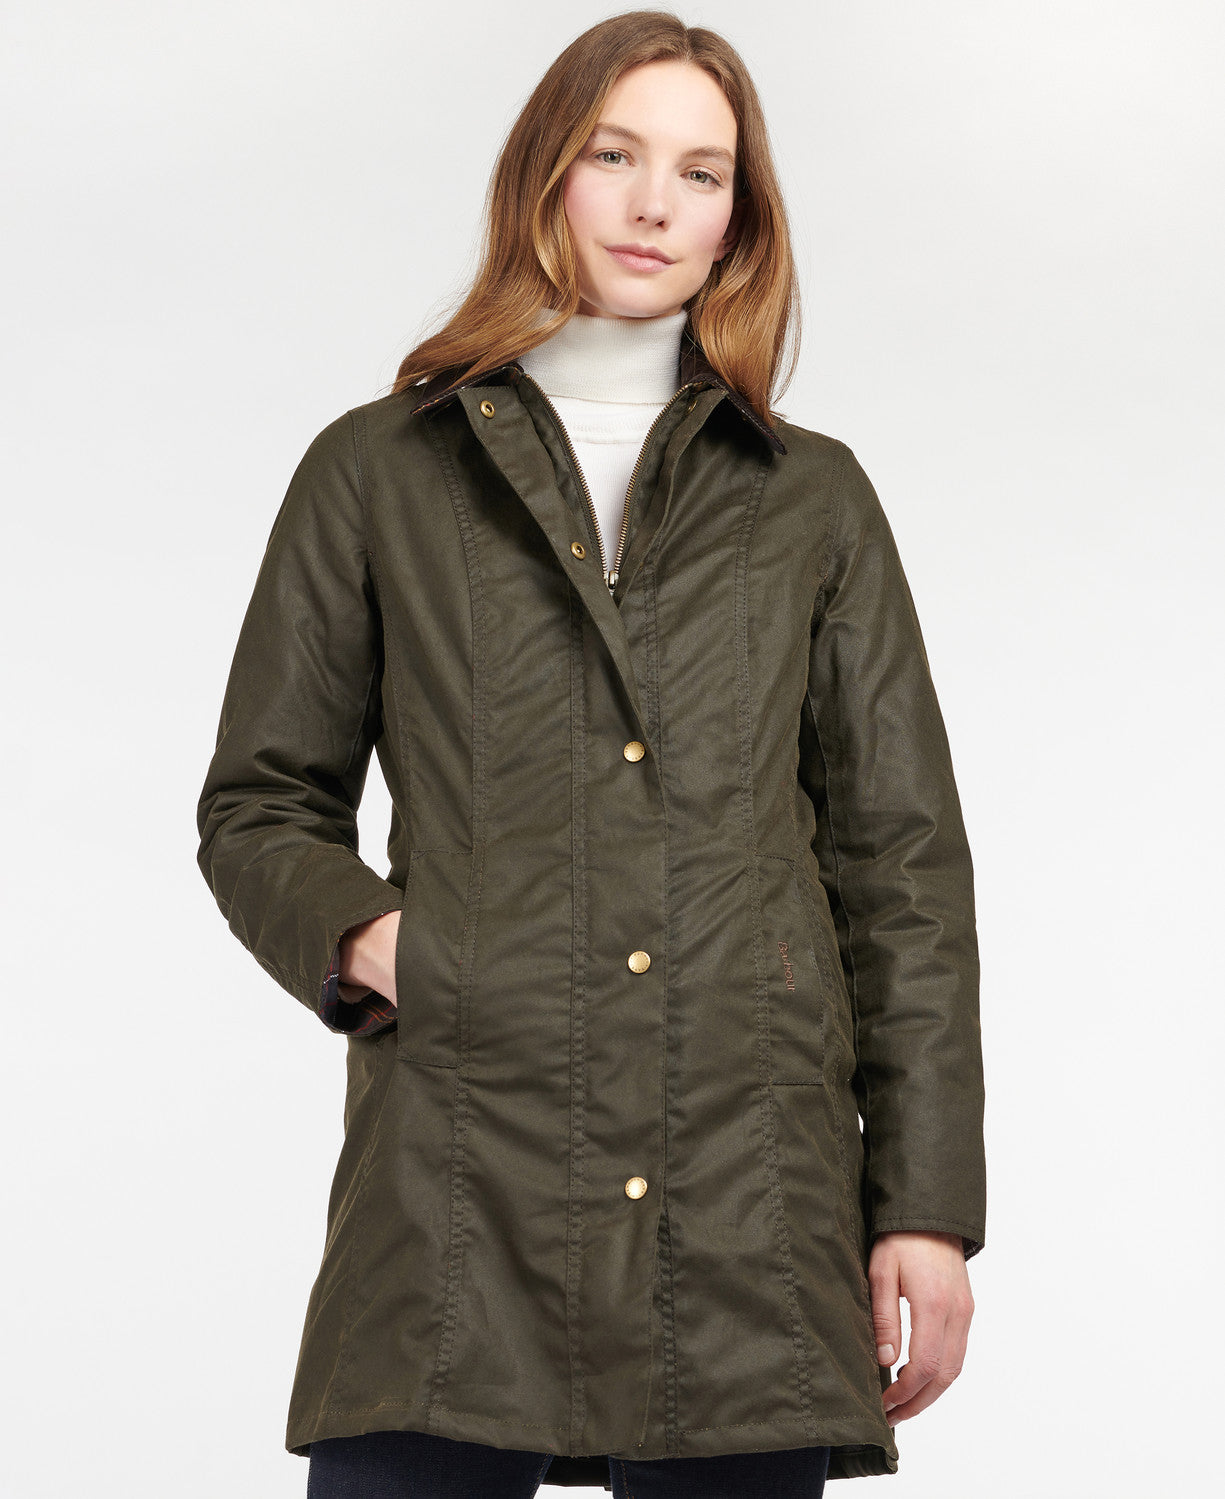 Barbour Belsay Waxed Jacket